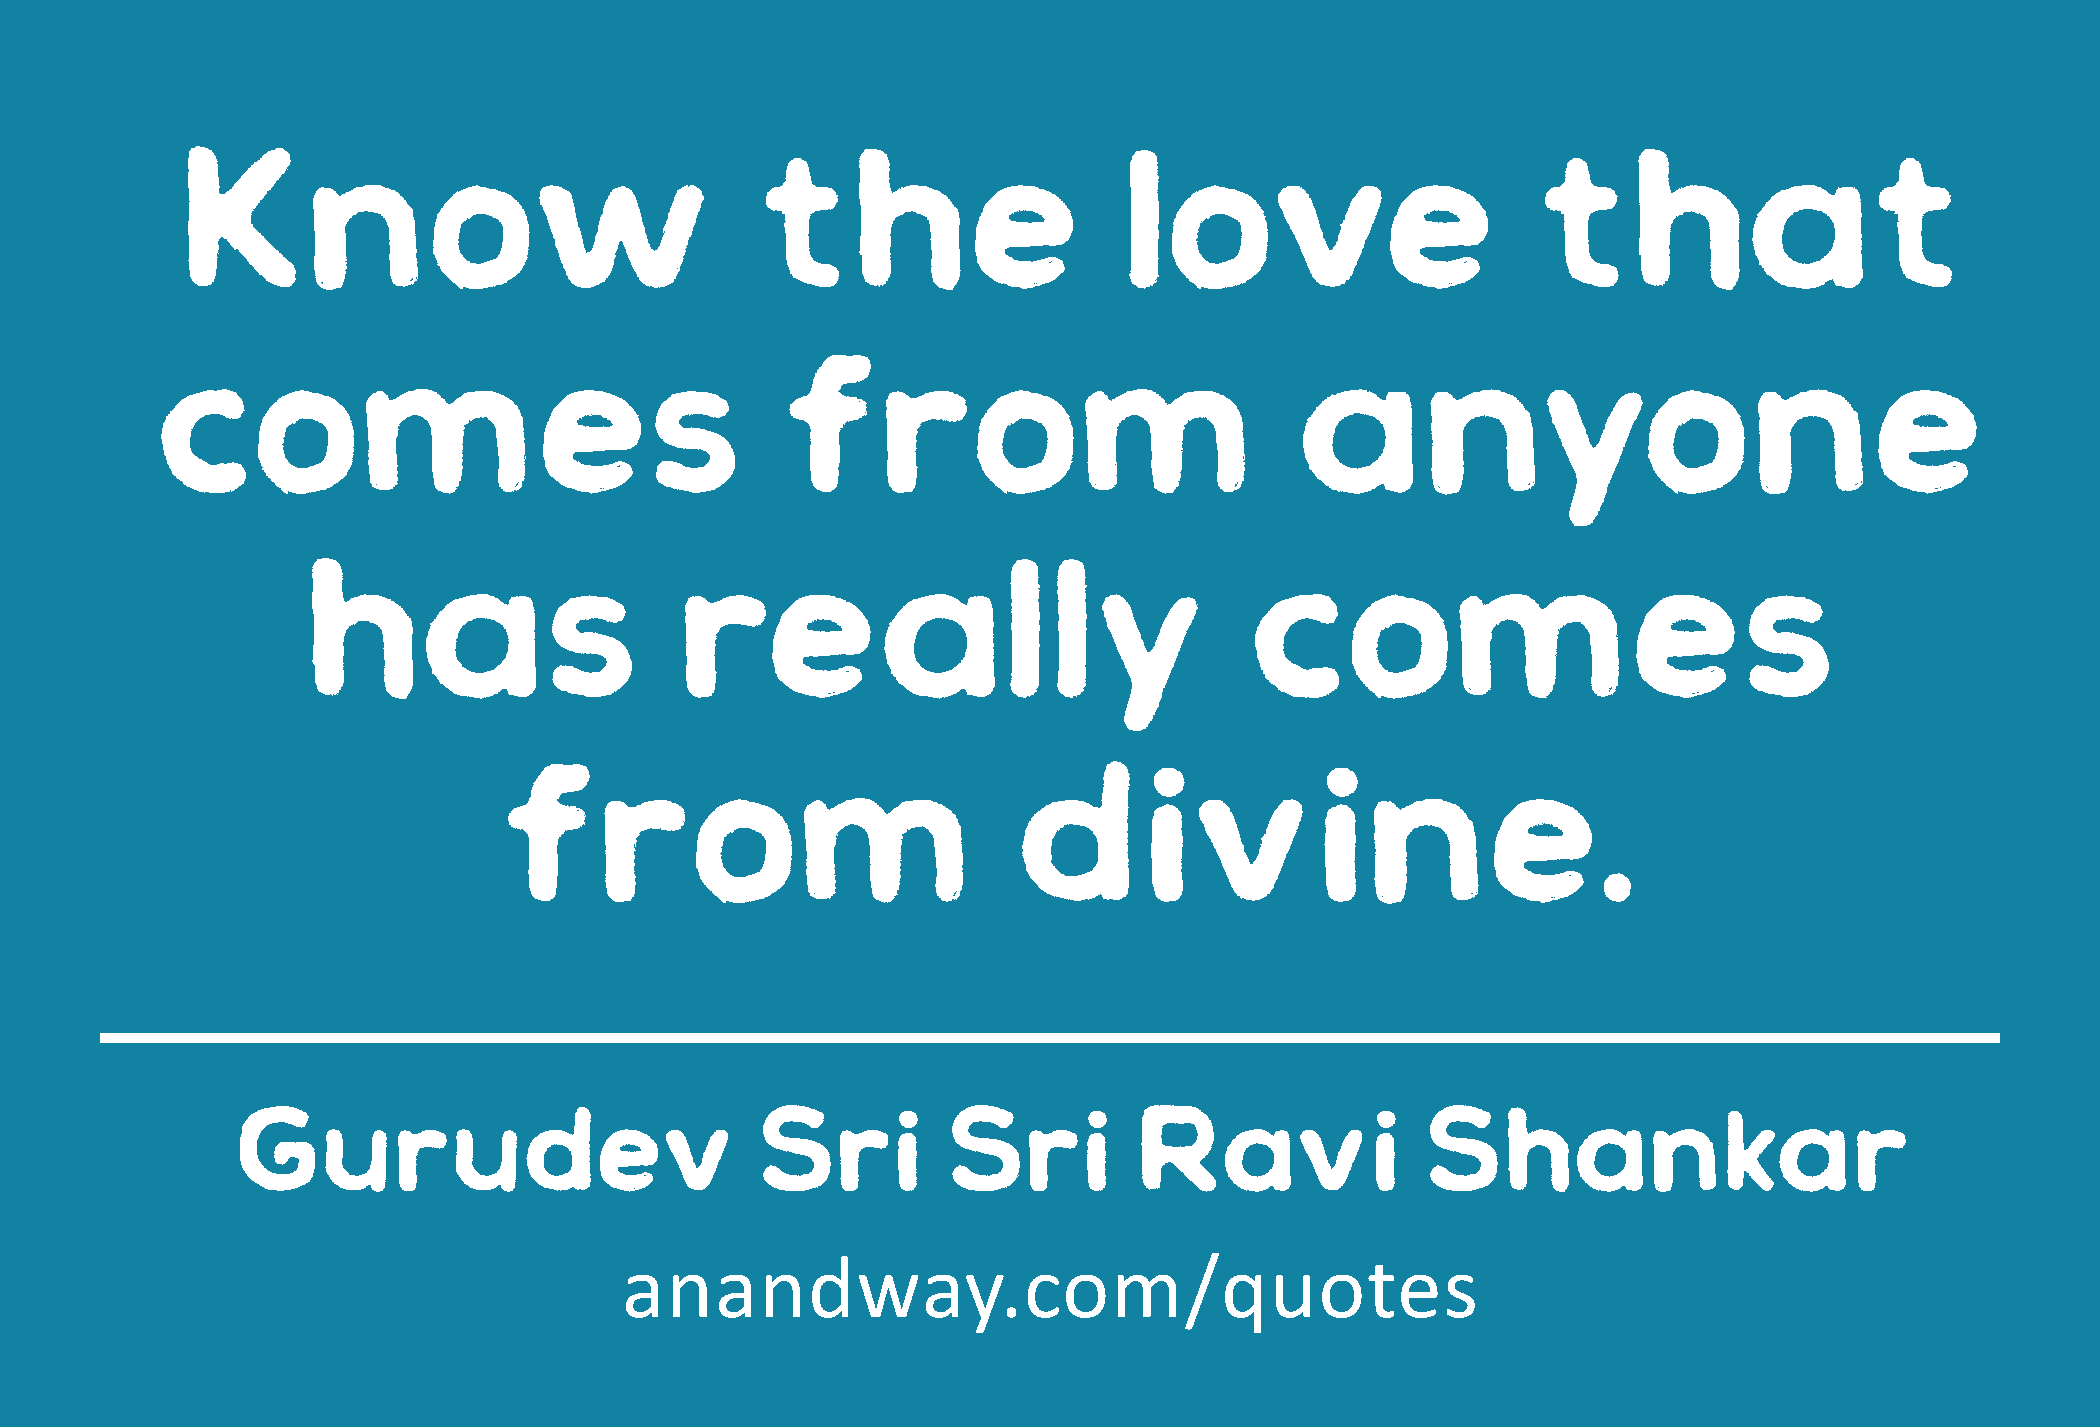 Know the love that comes from anyone has really comes from divine. 
 -Gurudev Sri Sri Ravi Shankar